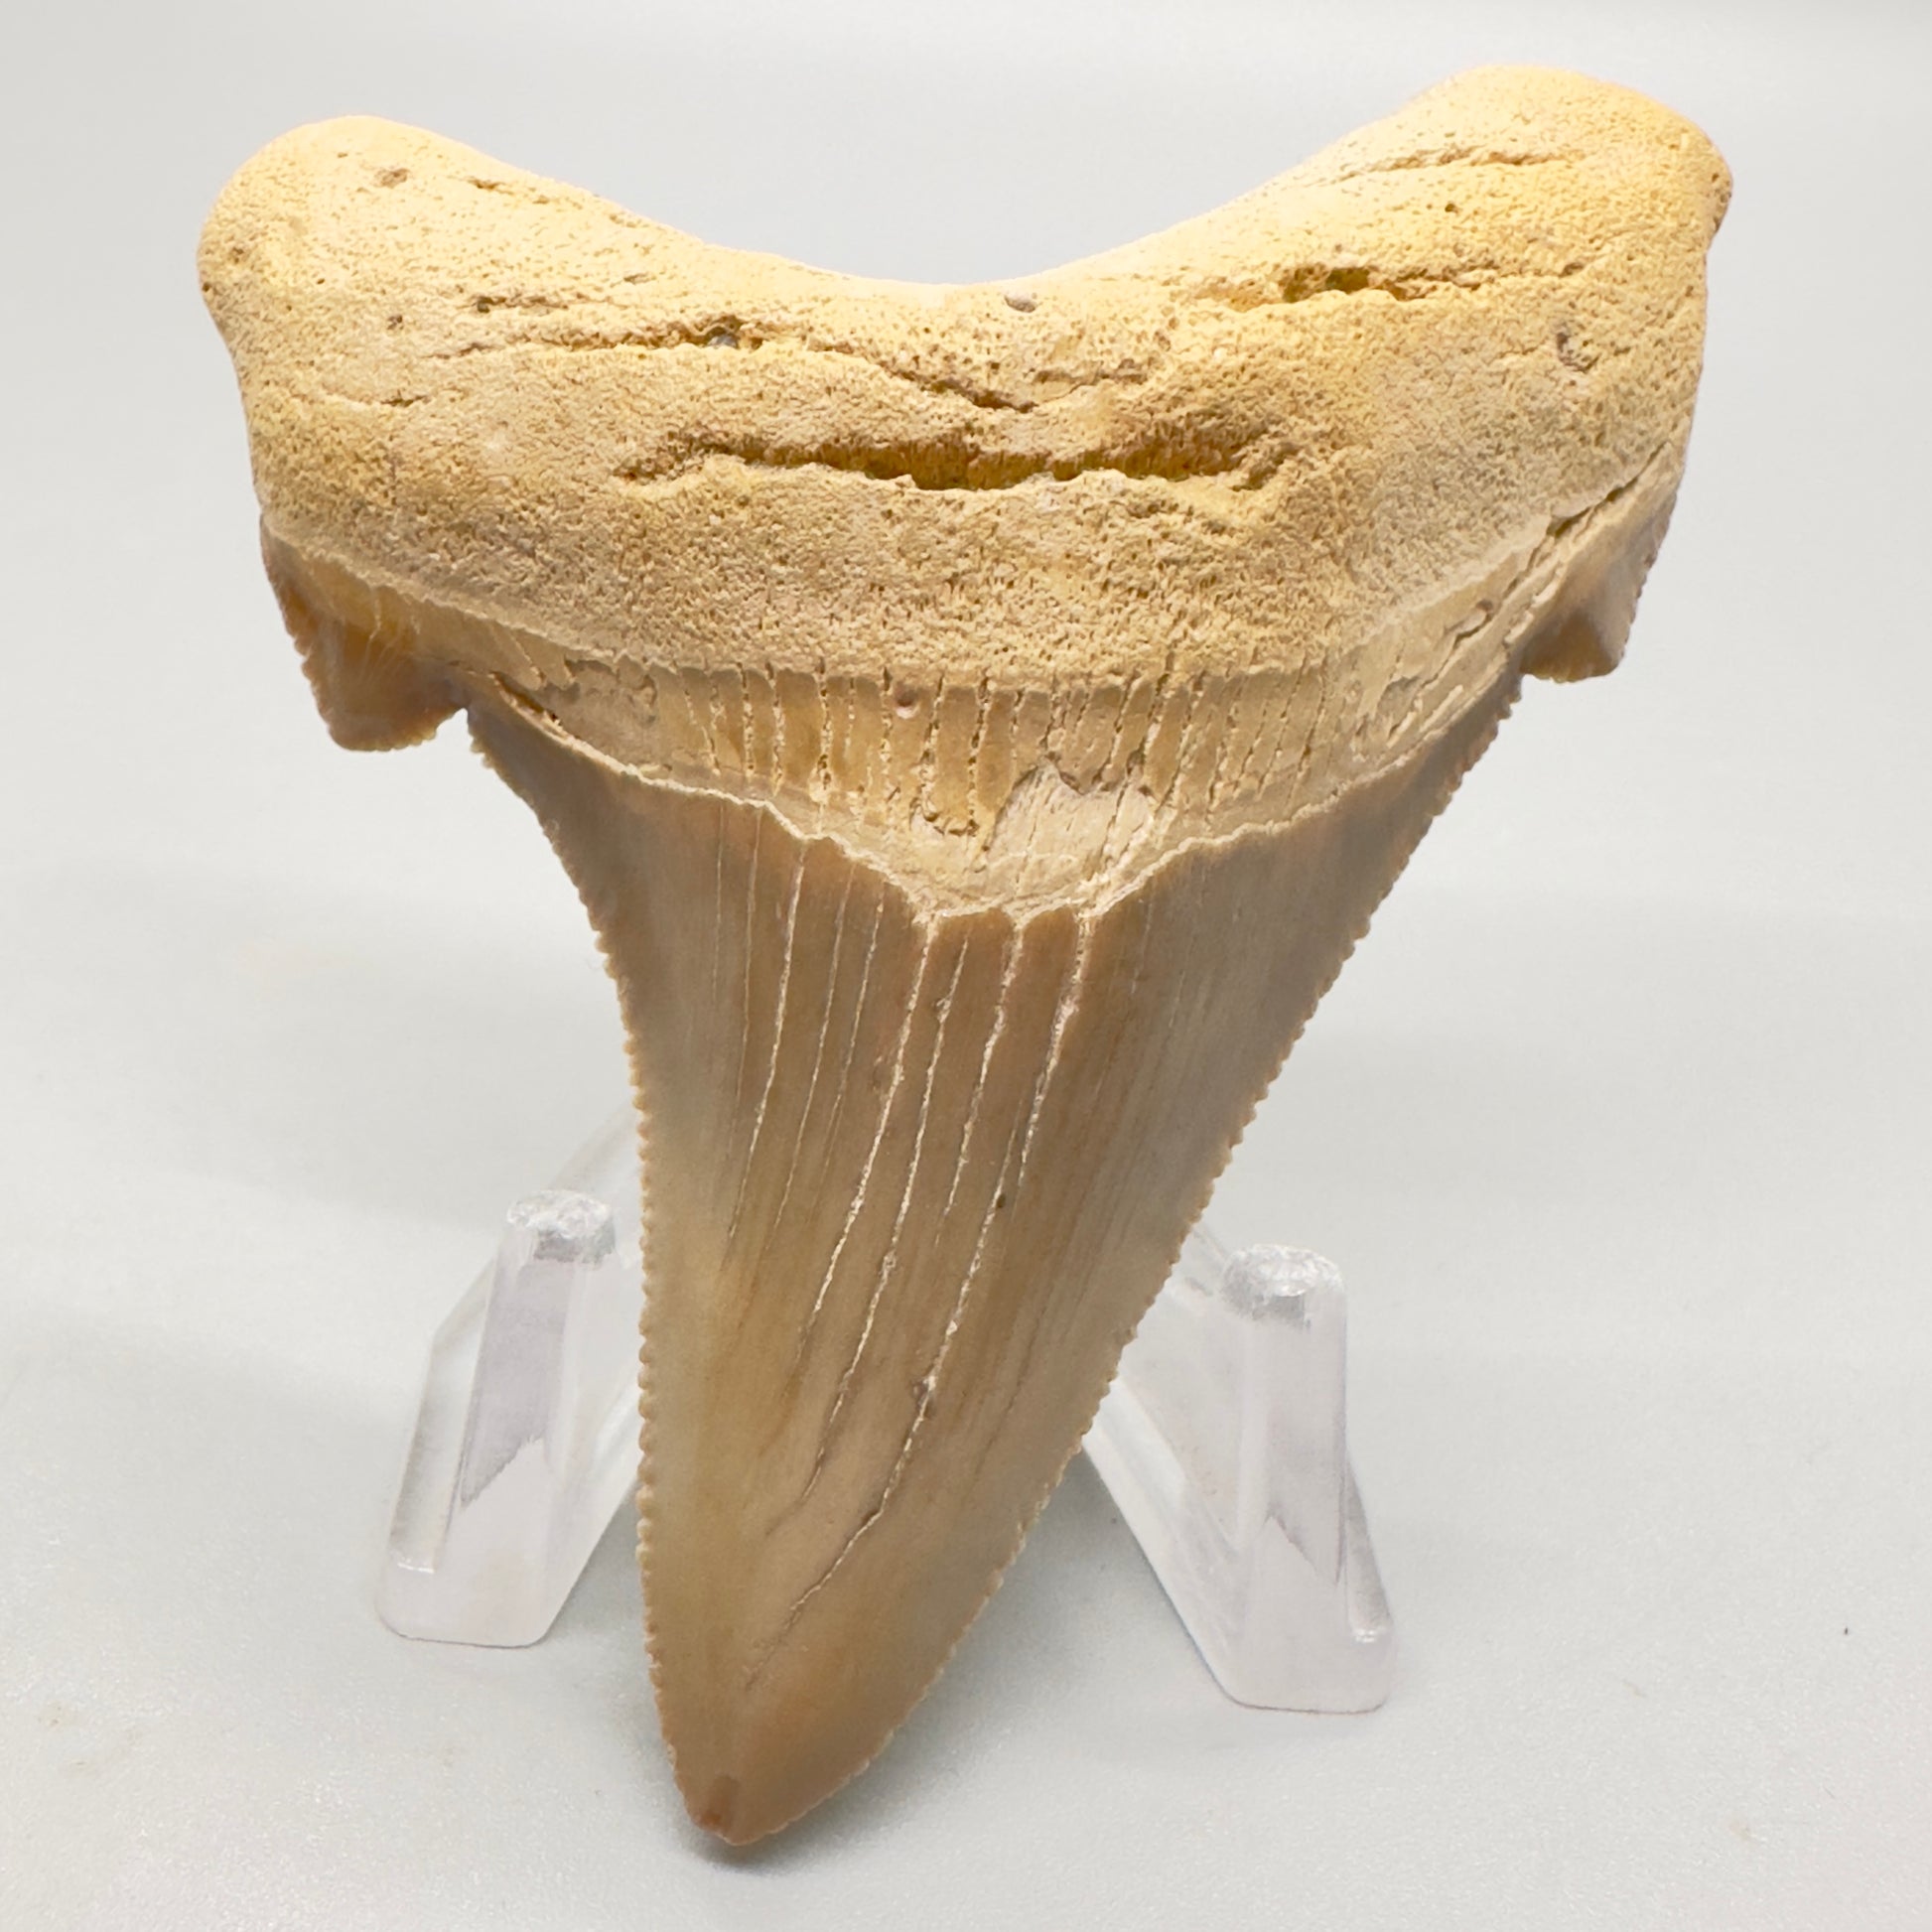 2.98 large, colorful, serrated Carcharocles angustidens shark tooth from Summerville, South Carolina AN411 front down